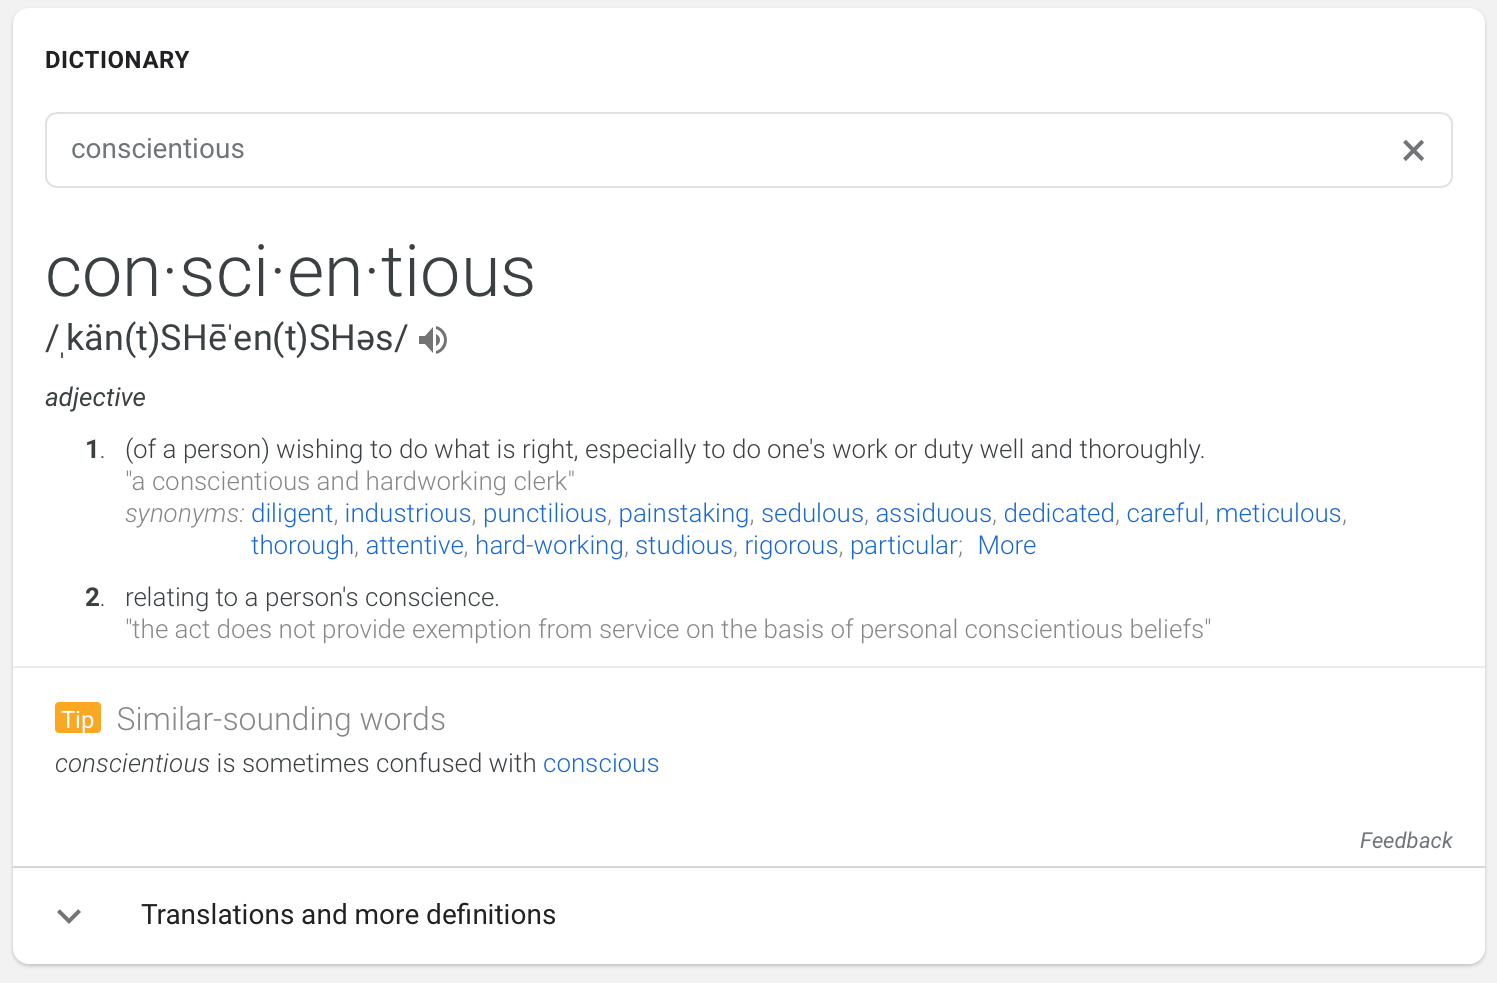 Google Adds ‘Similar Sounding Words’ to Dictionary Search Cards